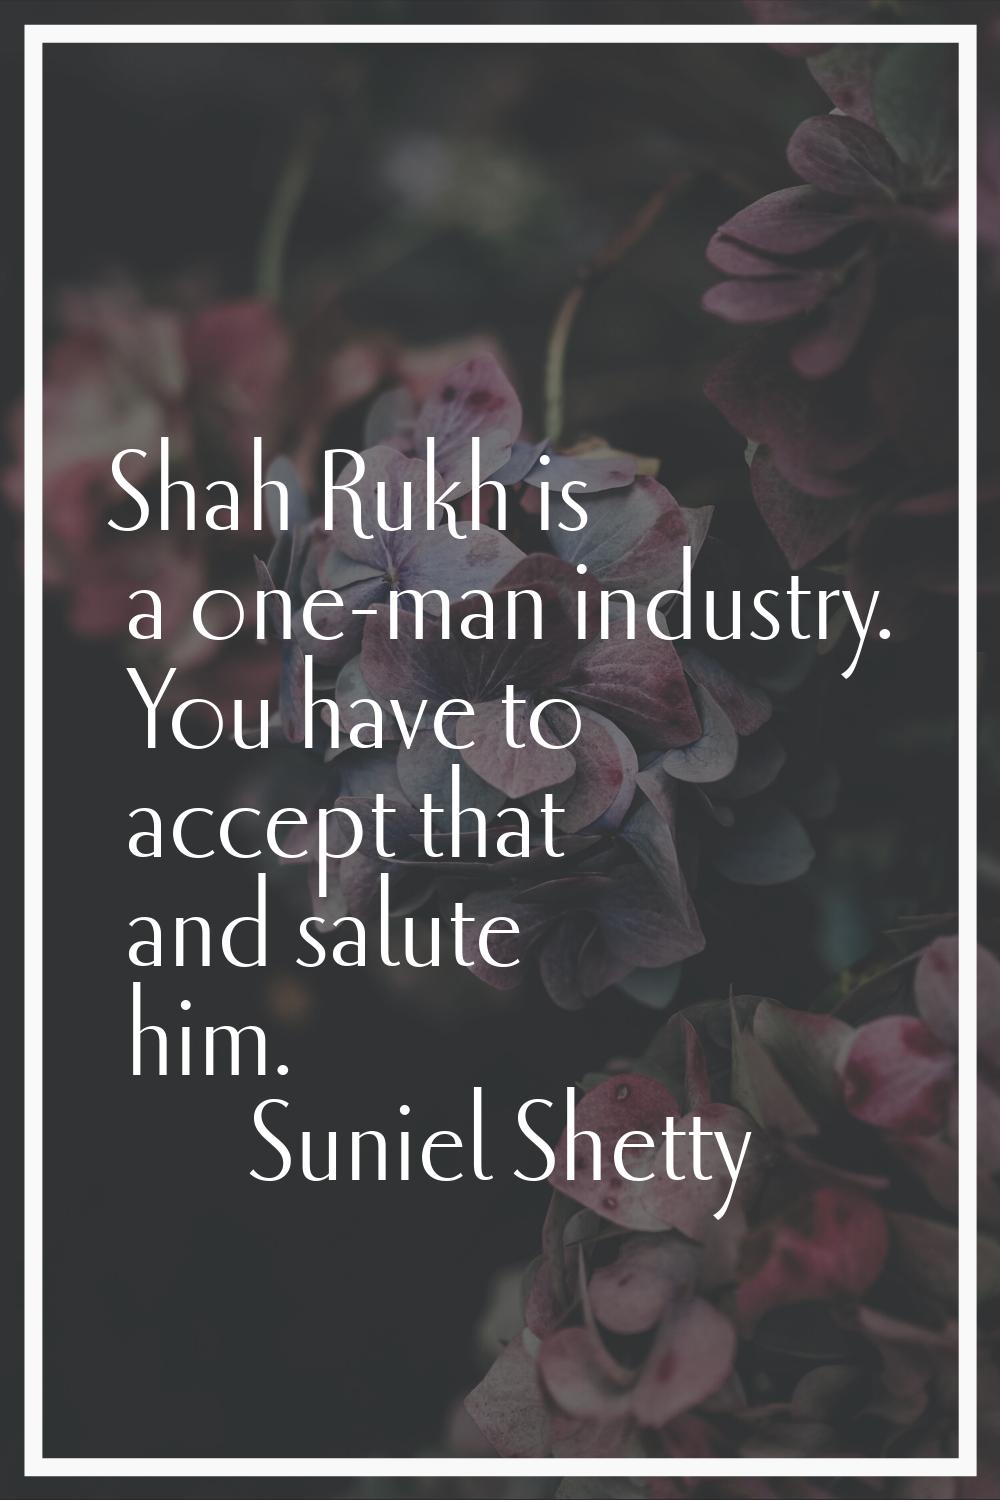 Shah Rukh is a one-man industry. You have to accept that and salute him.